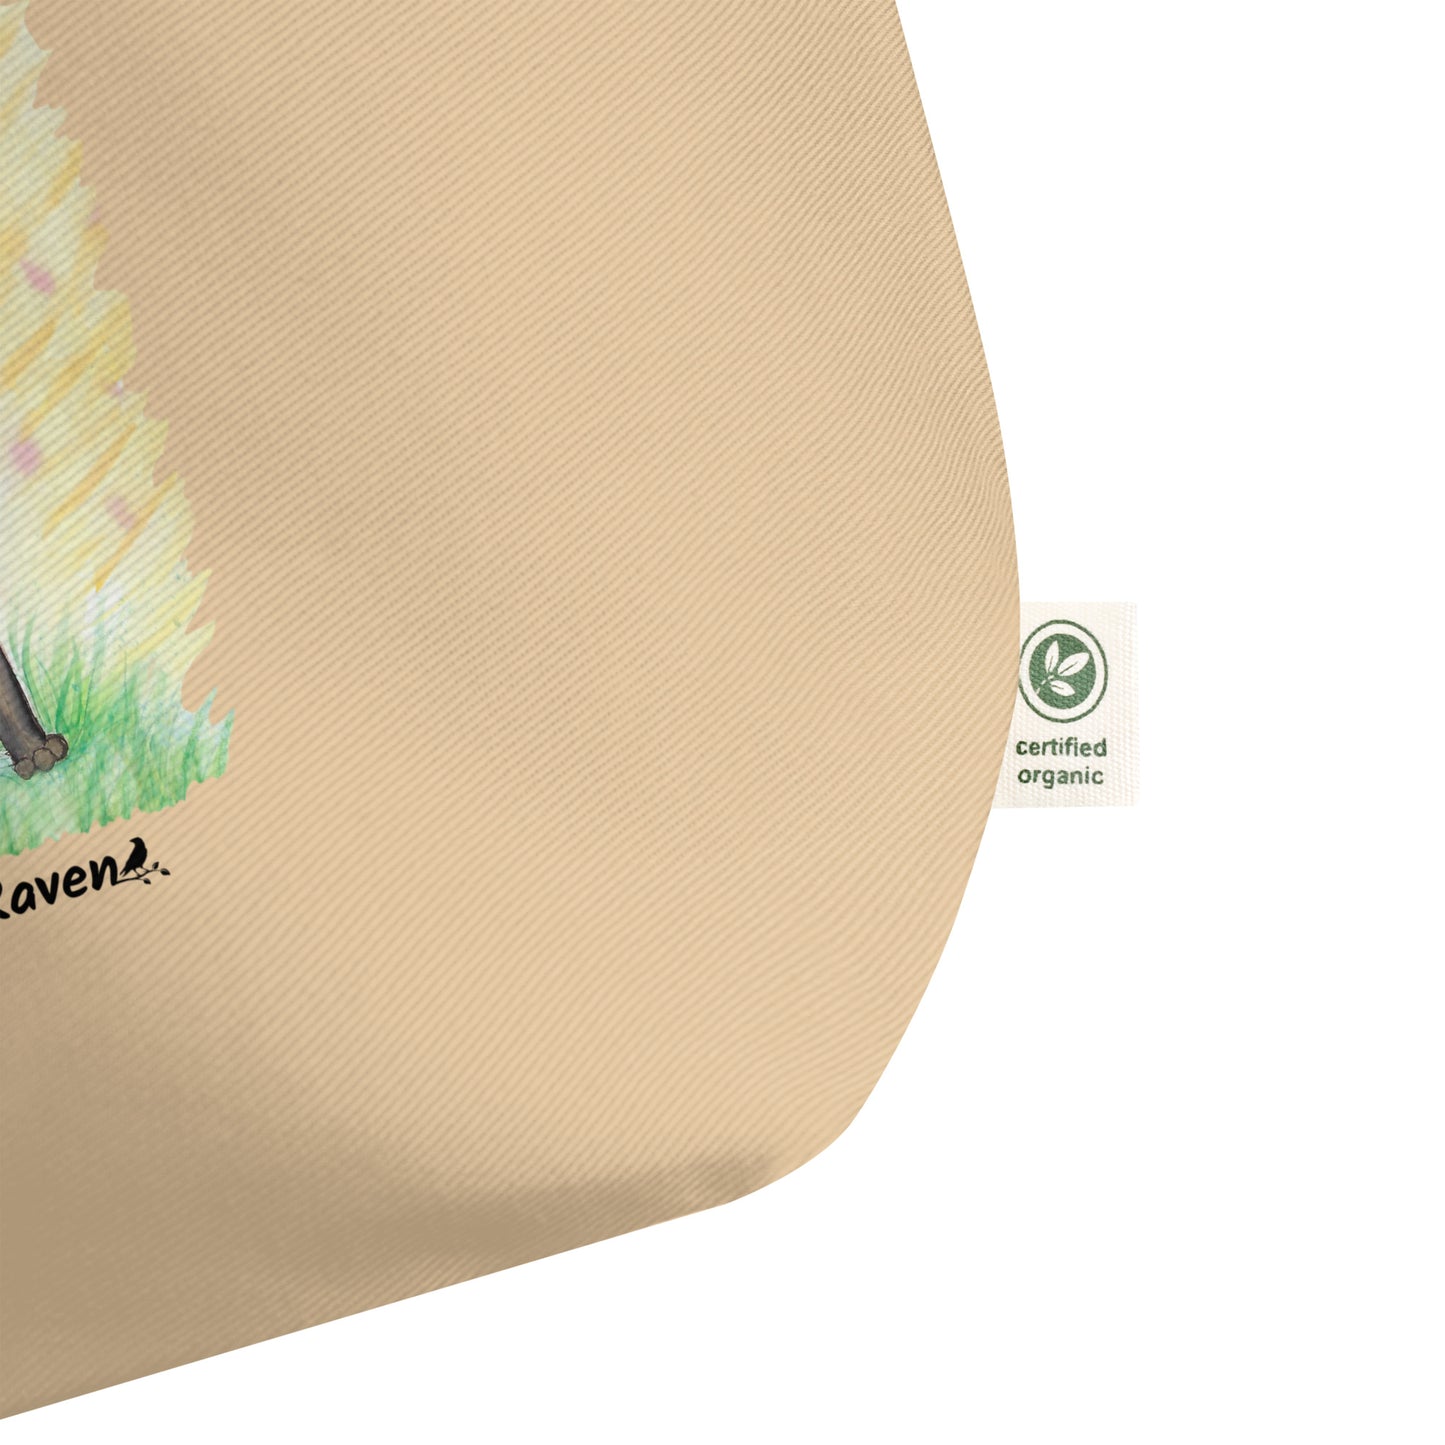 Large eco oyster-colored tote bag details. Certified organic cotton tag.